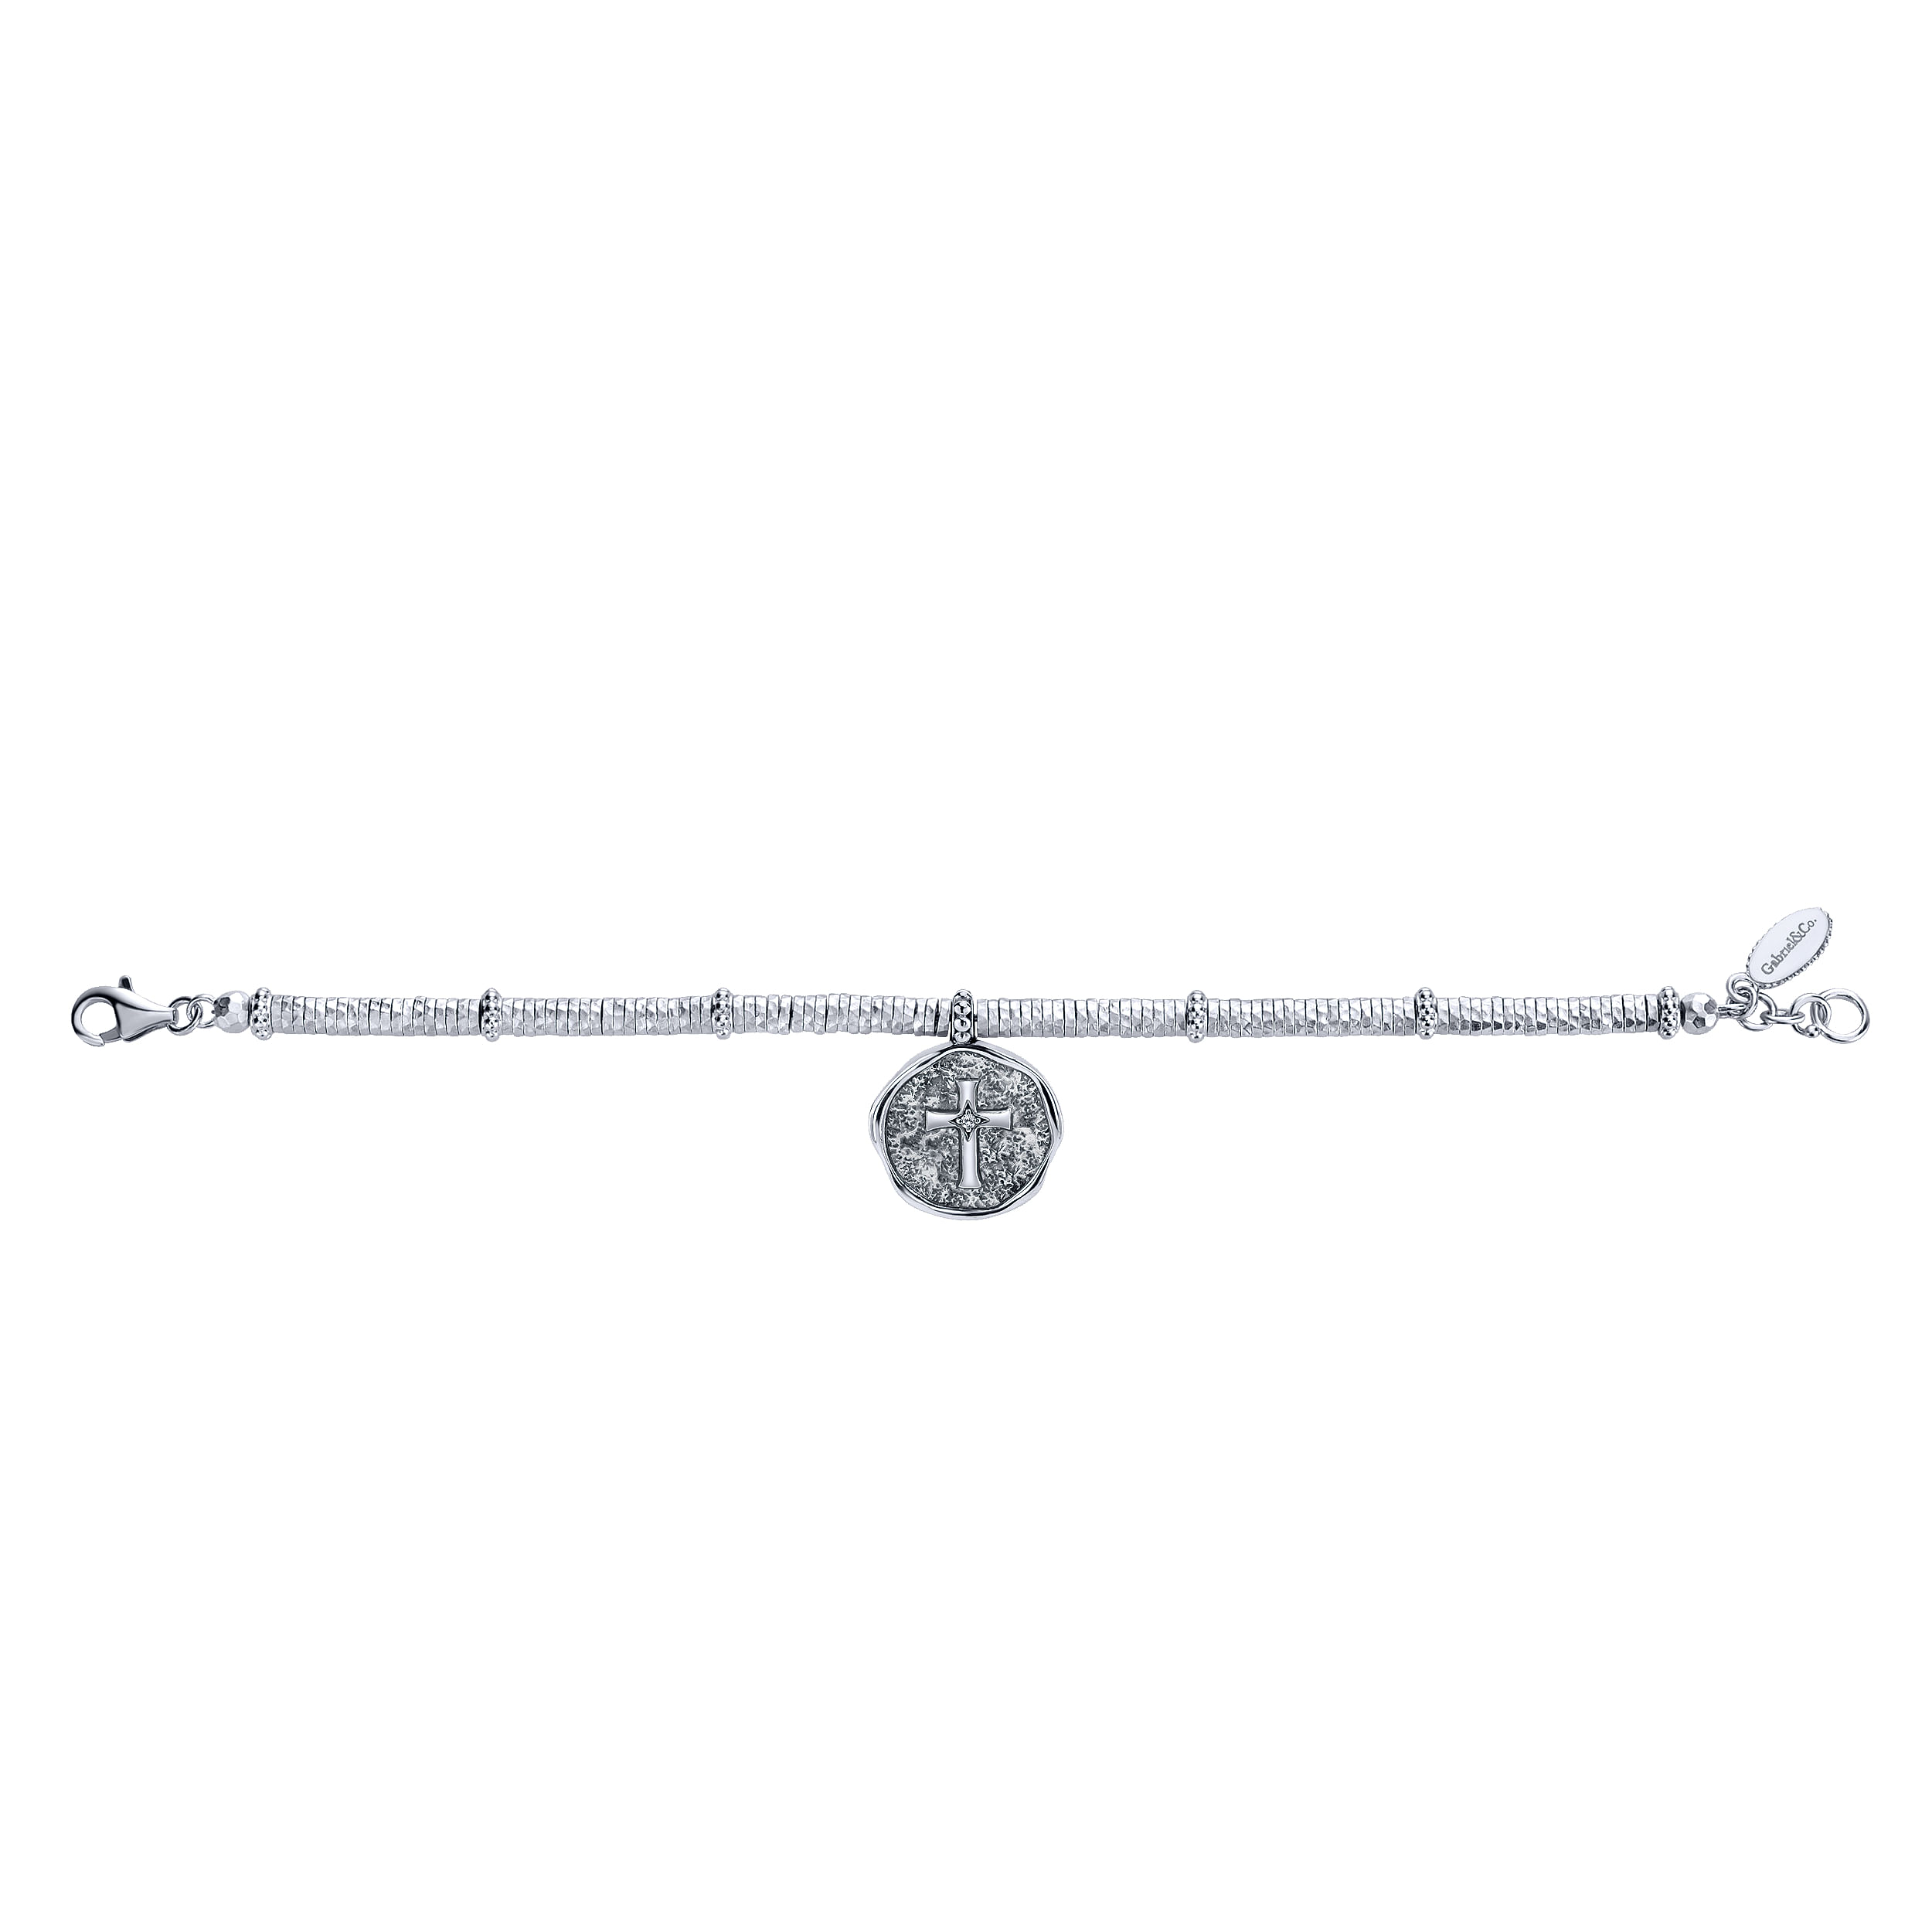 Stainless Steel and 925 Sterling Silver Cross Charm Bracelet with White Sapphire